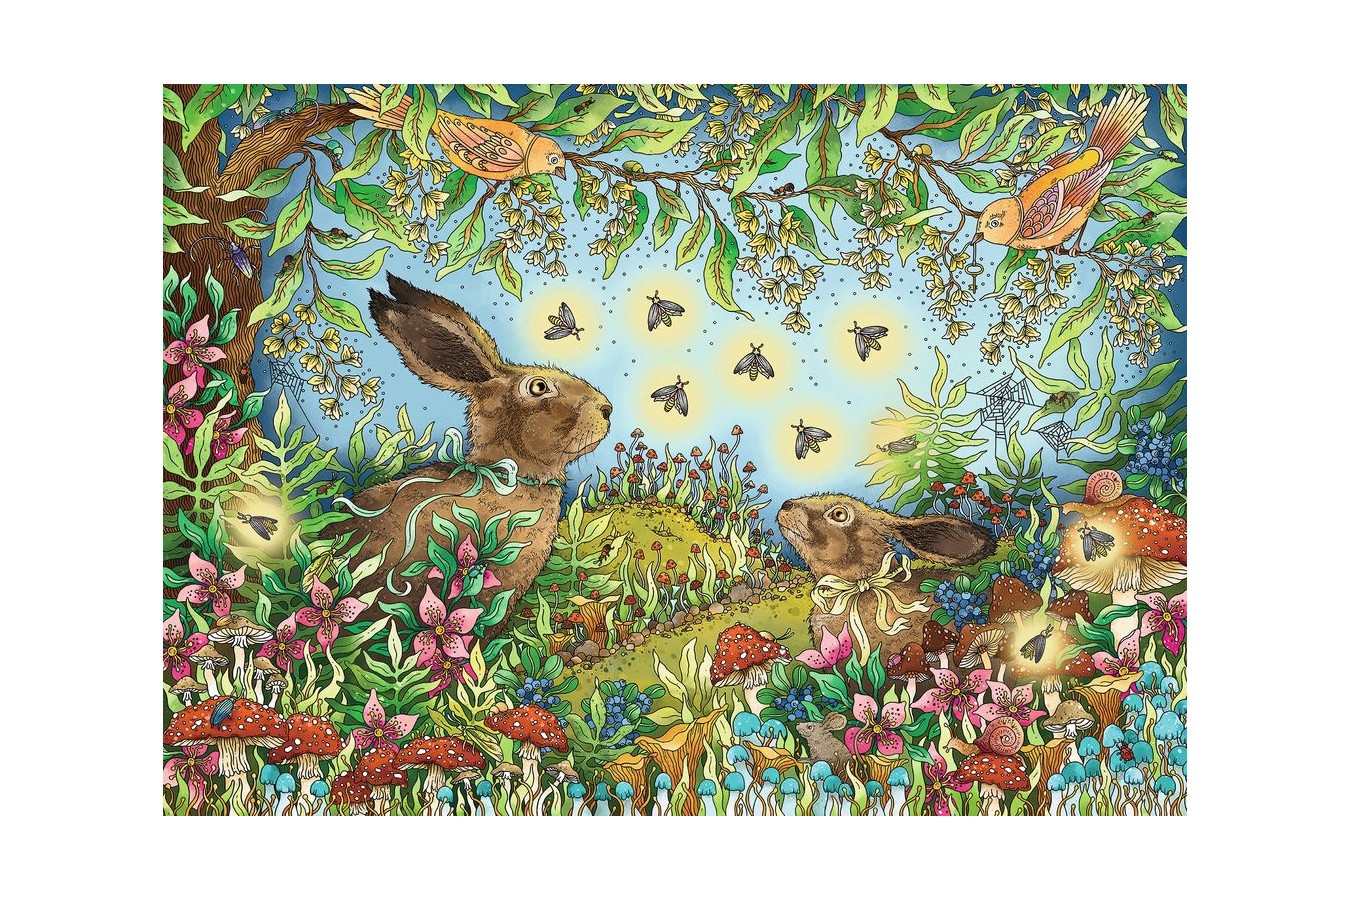 Puzzle Ravensburger - Magic Forest, 1000 piese (15172)